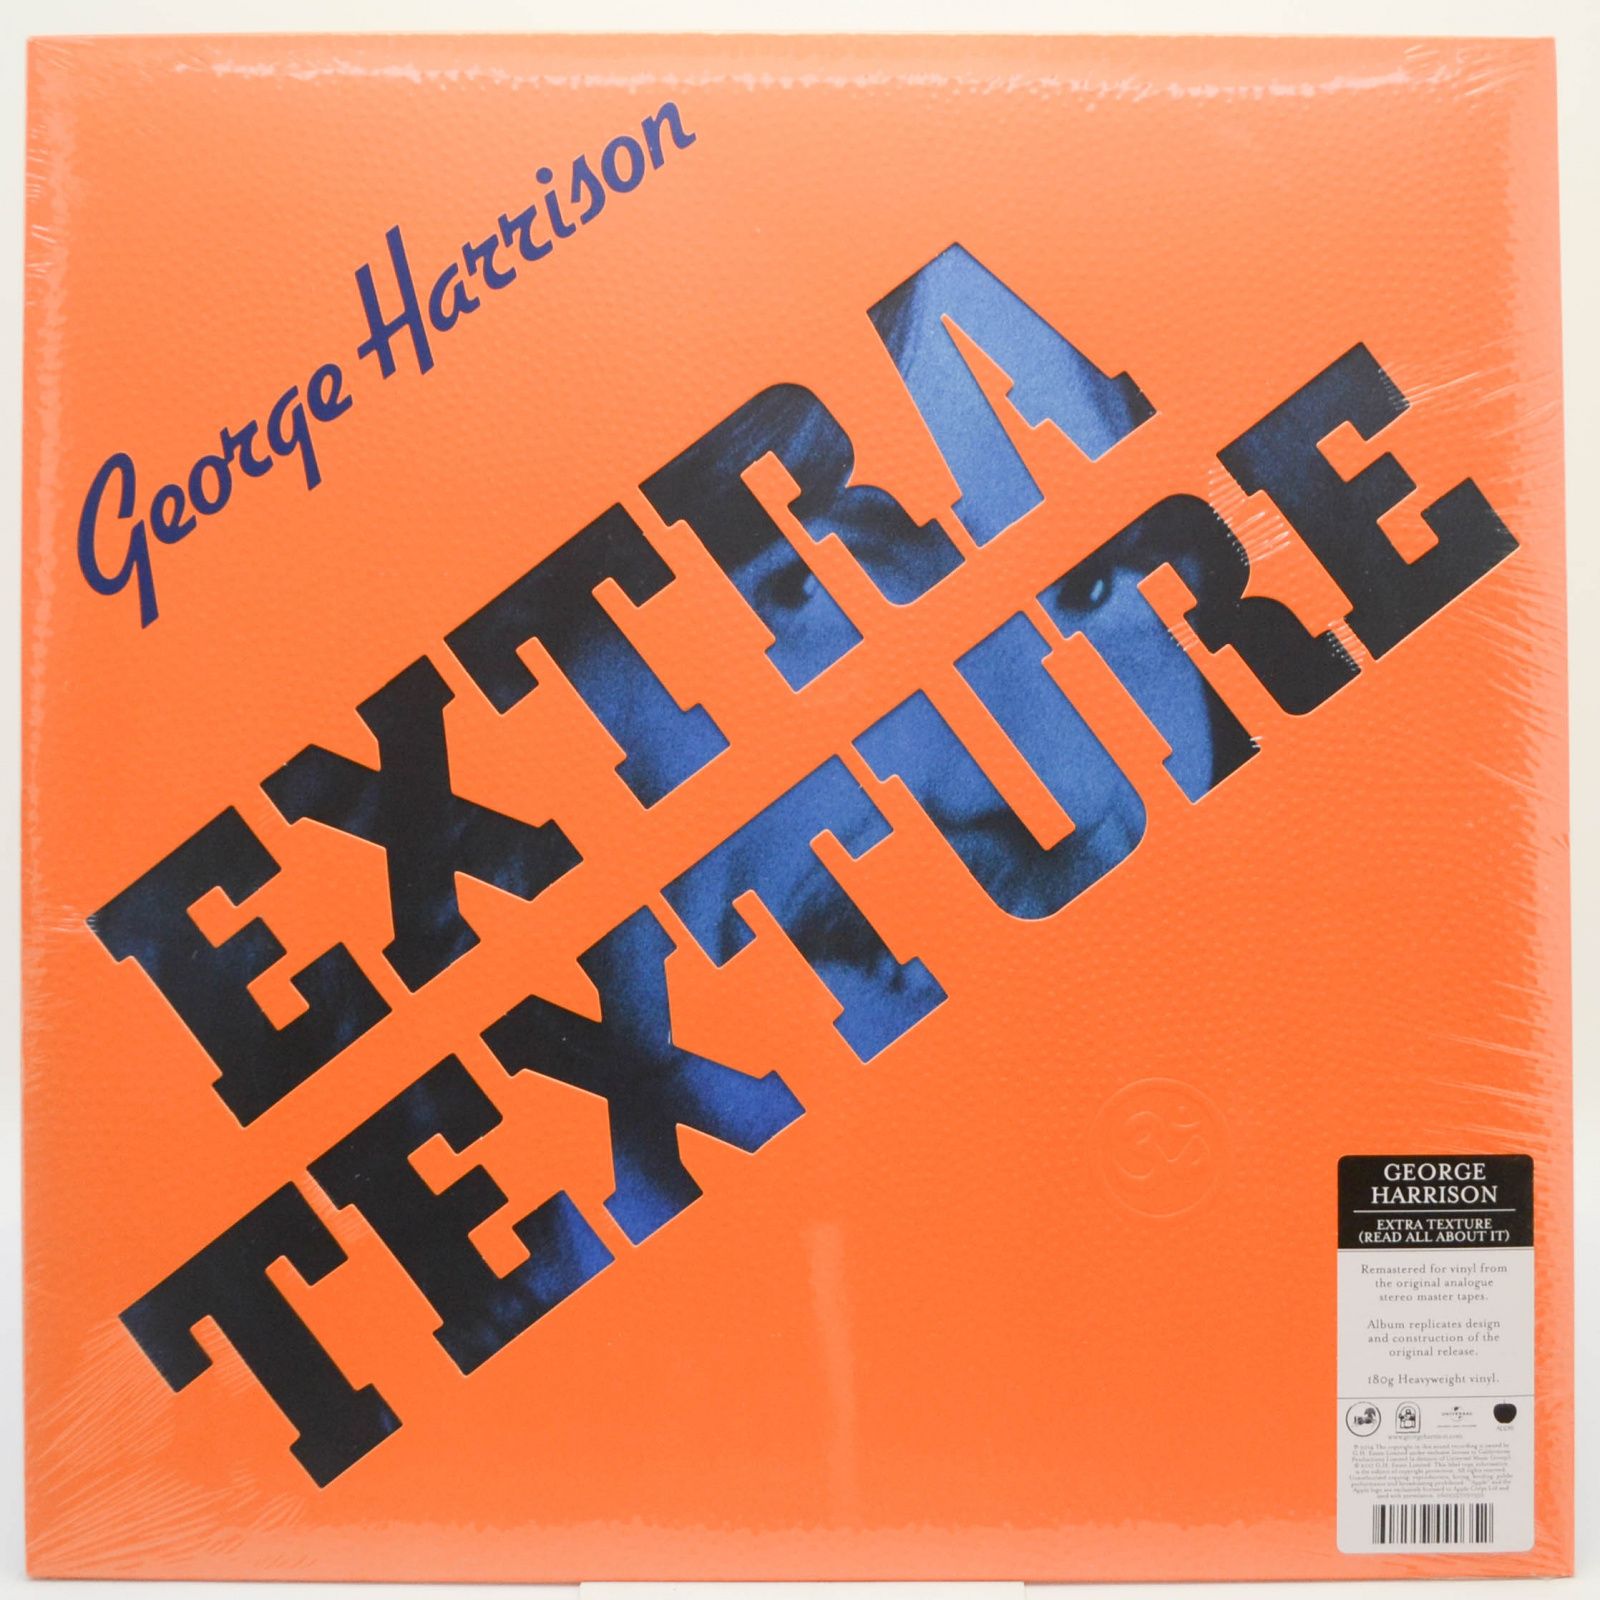 George Harrison — Extra Texture (Read All About It), 2017